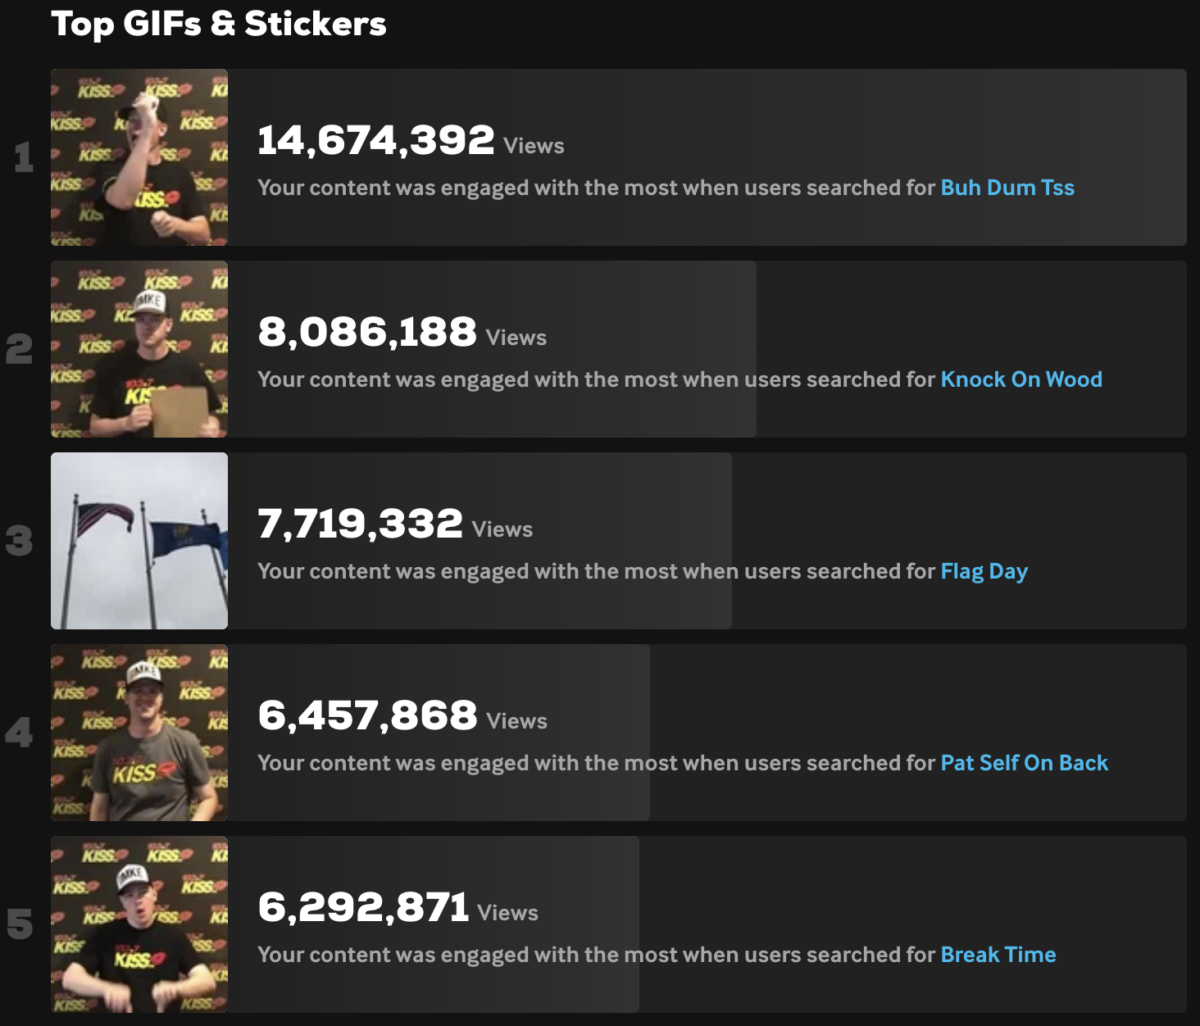 "Top GIFs and Stickers. Number one with 14,674,392 views, number two with 8,086,188 views, third with 7,719,332 views, fourth with 6,457,868 views, and fifth place has 6,292,871 views."